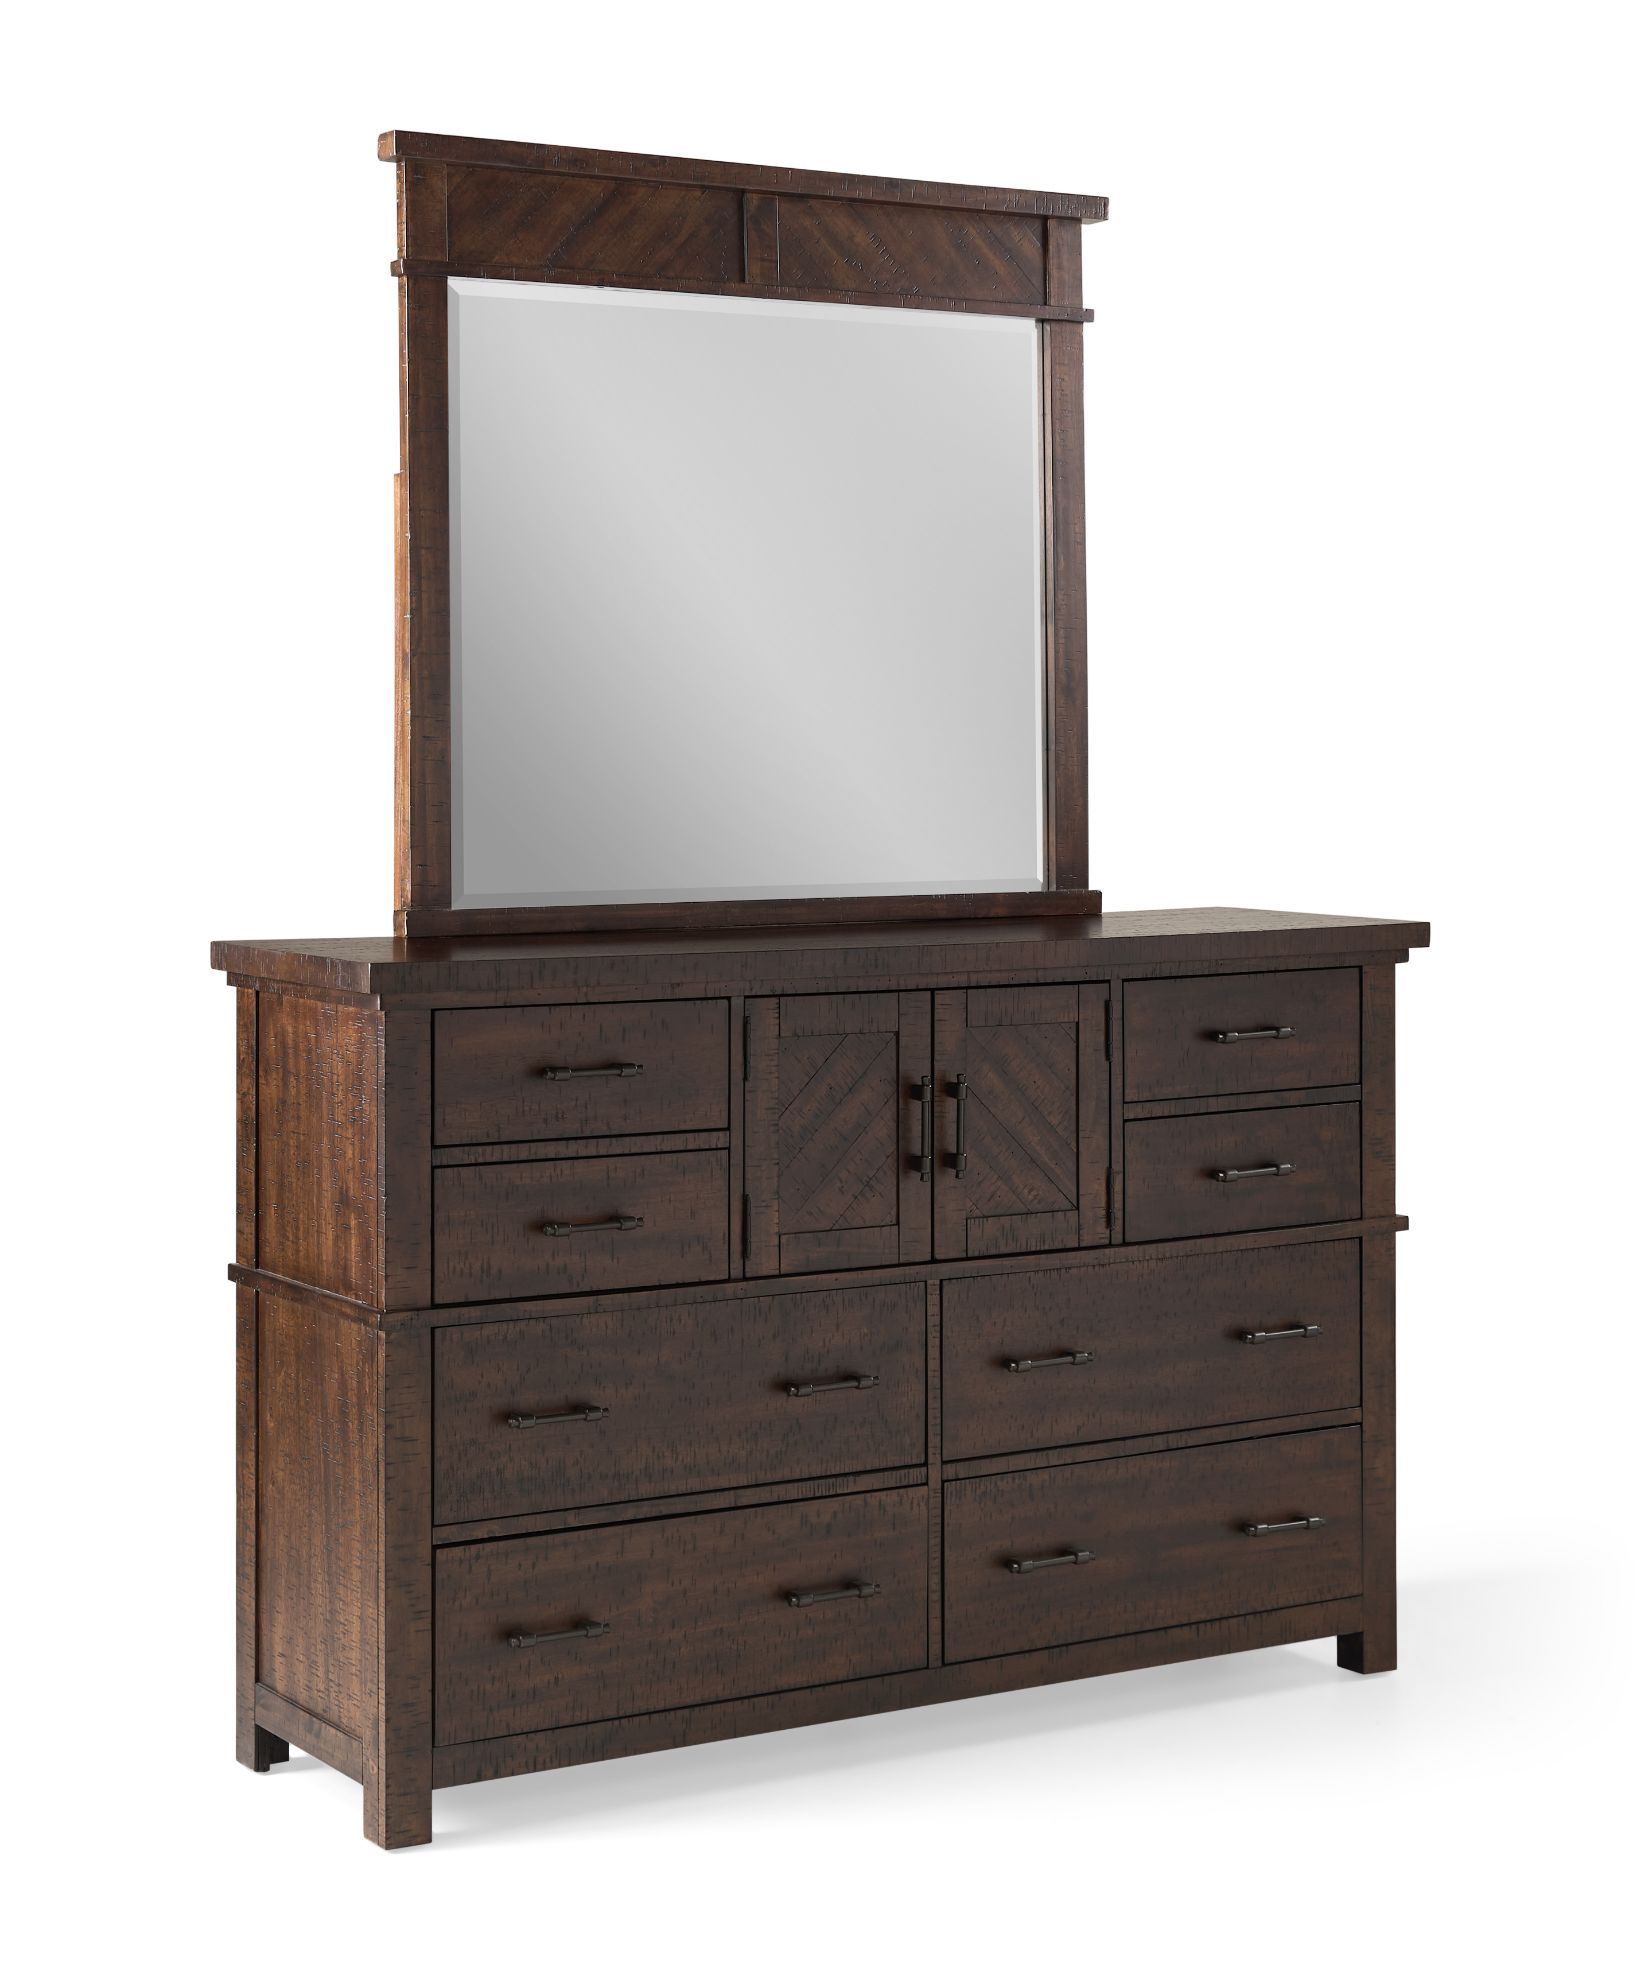 Picture of Jax Dresser and Mirror